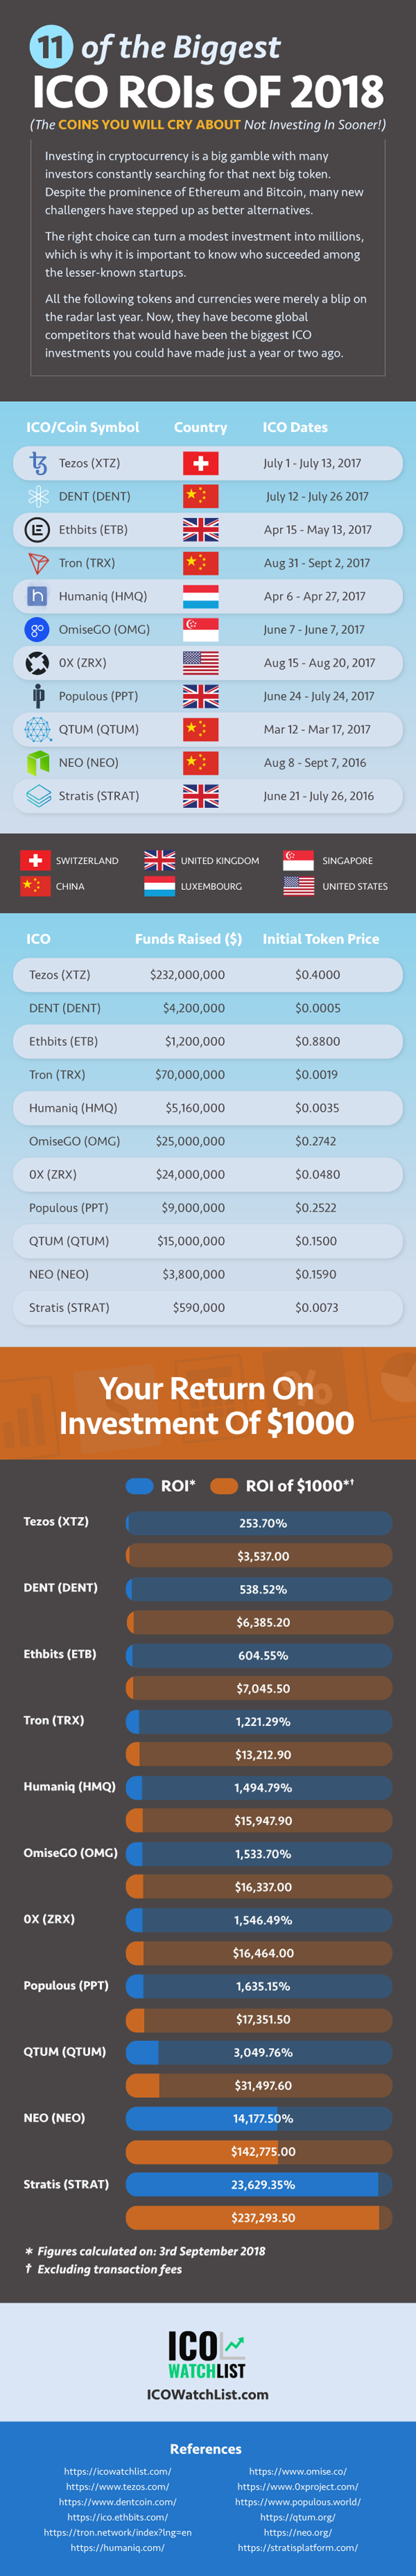 11 of the Biggest ICO ROIs of 2018 [Infographics]